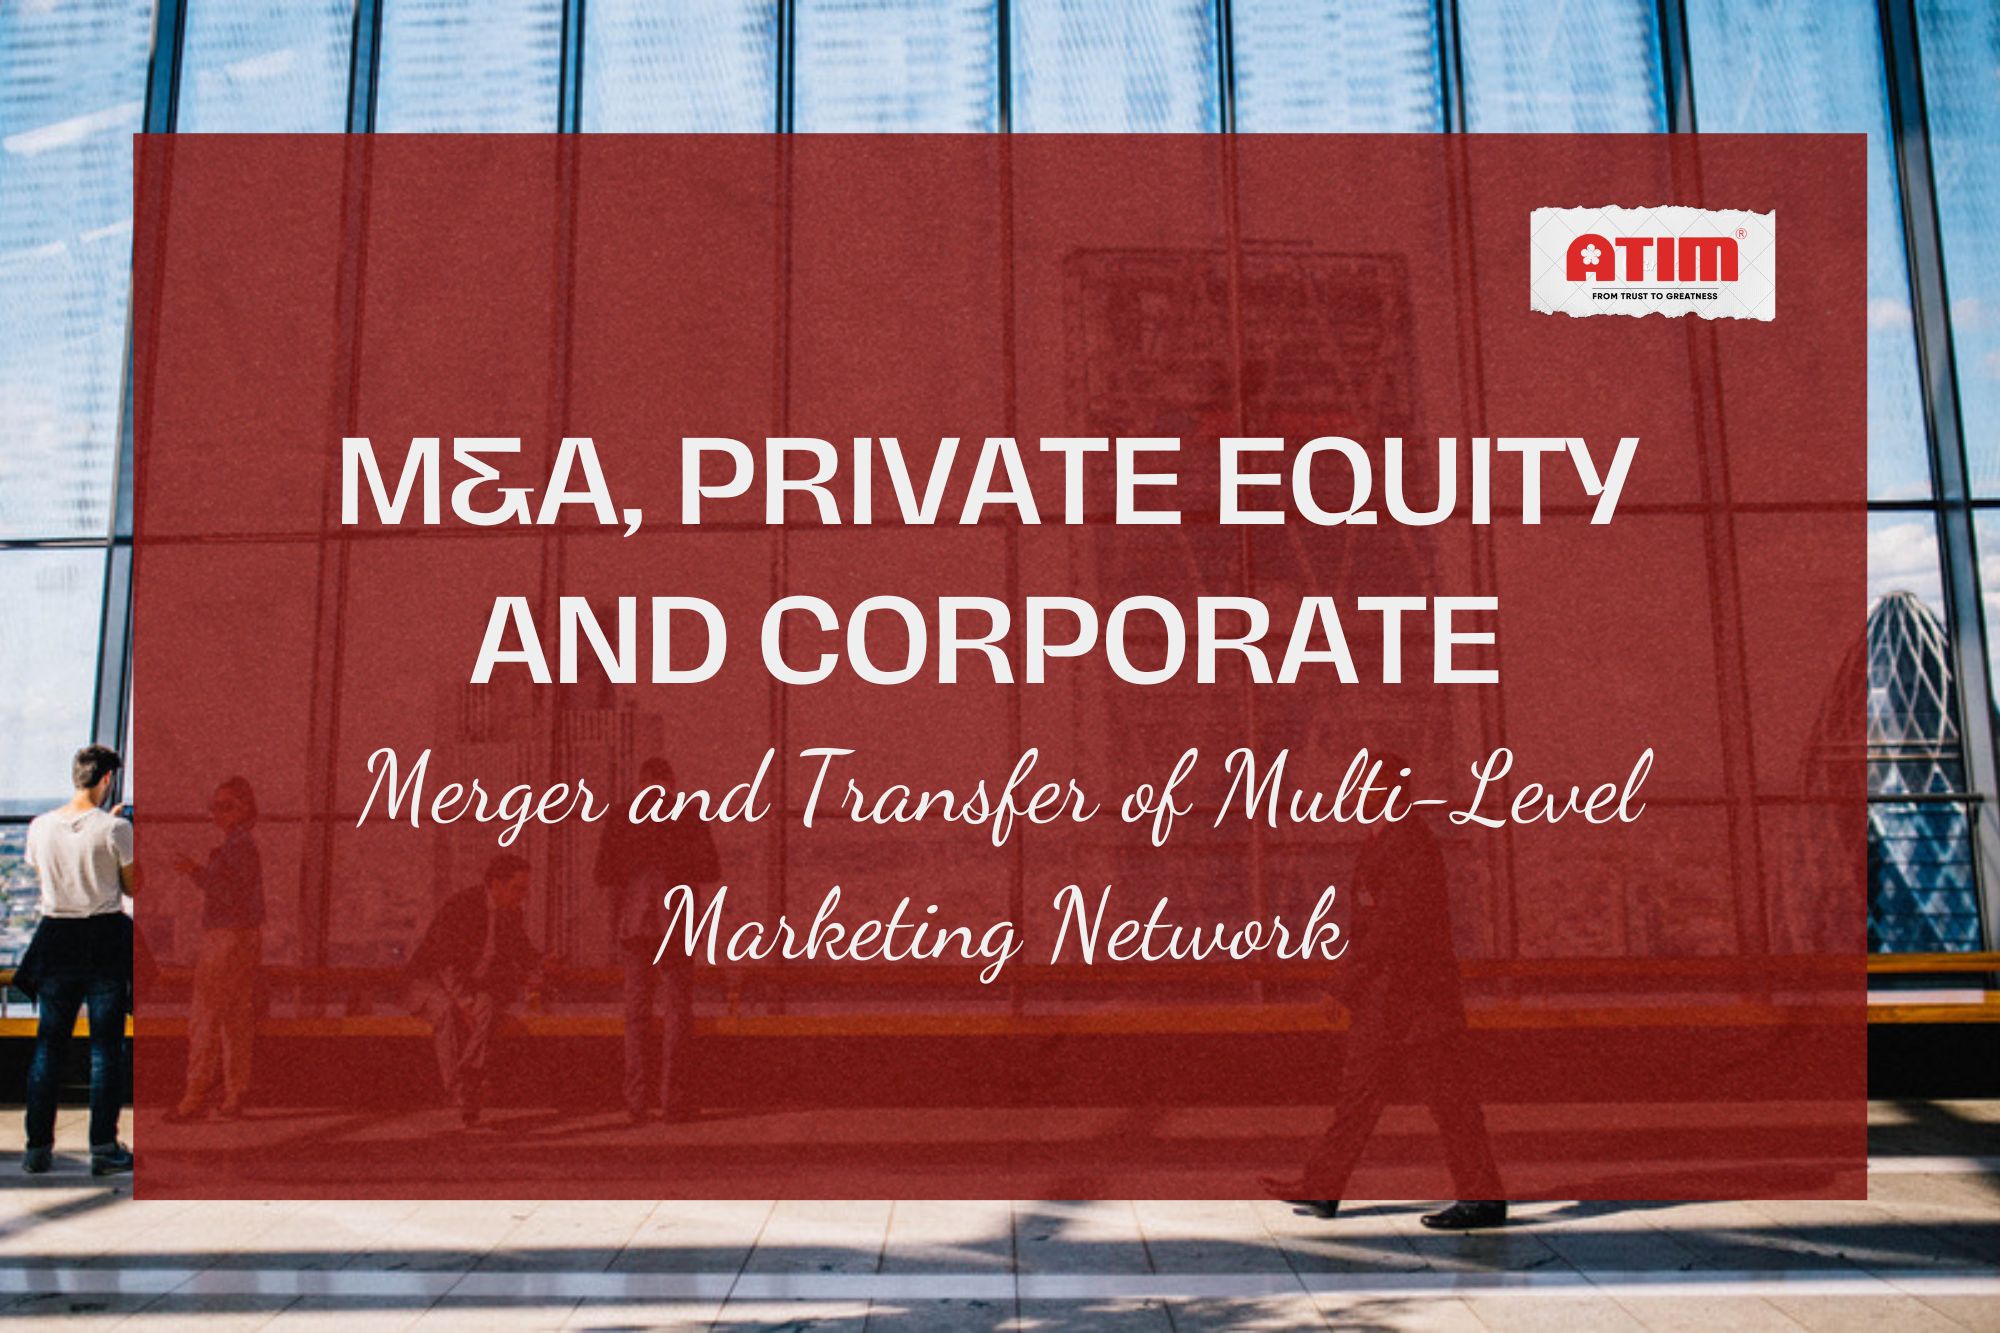 M&A, Private Equity and Corporate - Merger and Transfer of Multi-Level Marketing Network